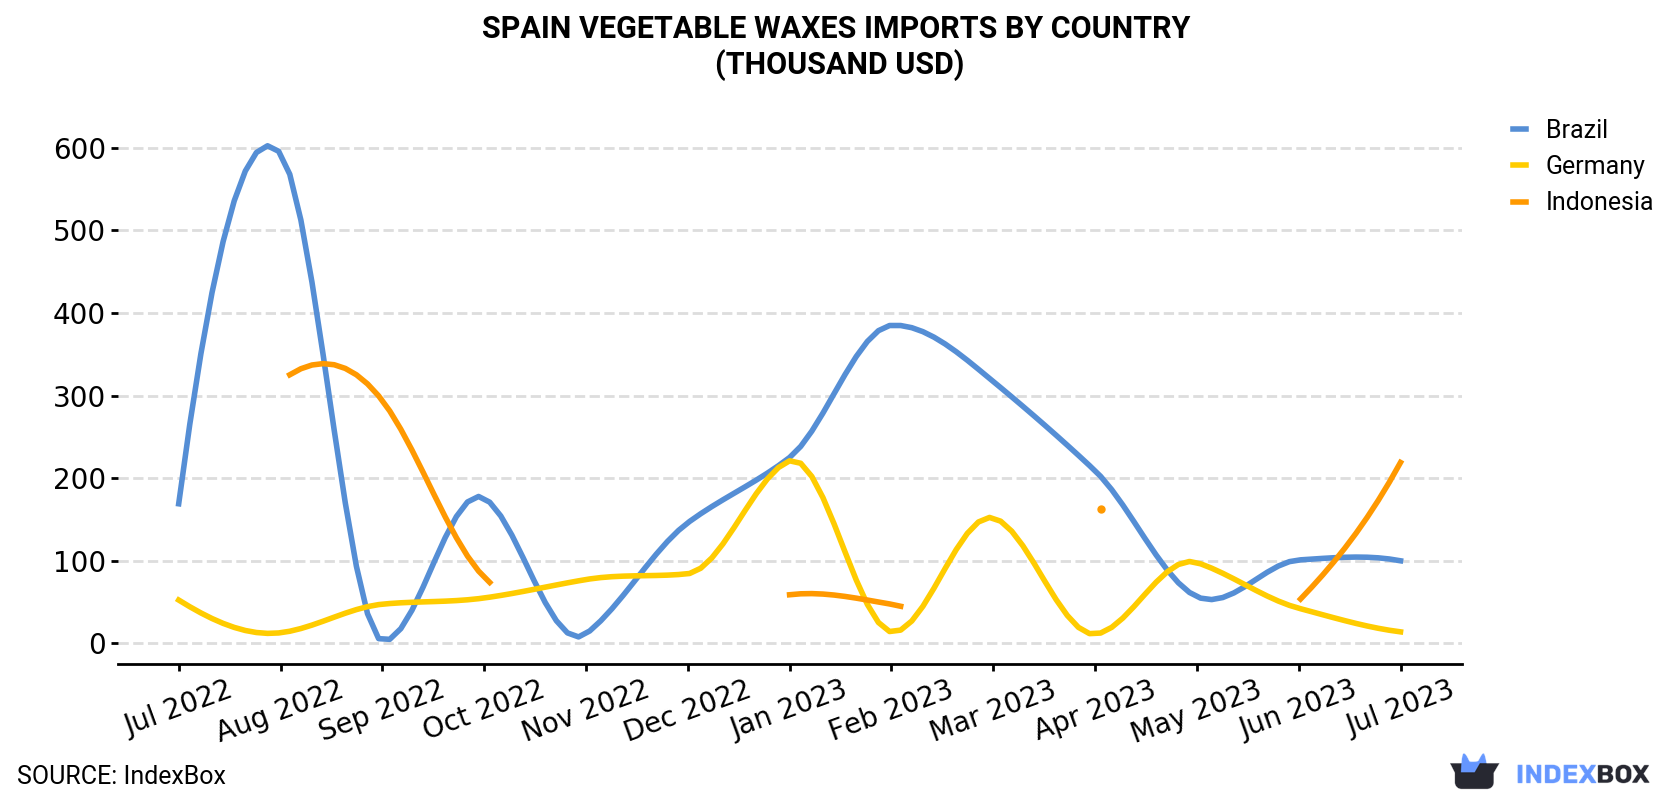 Spain Vegetable Waxes Imports By Country (Thousand USD)